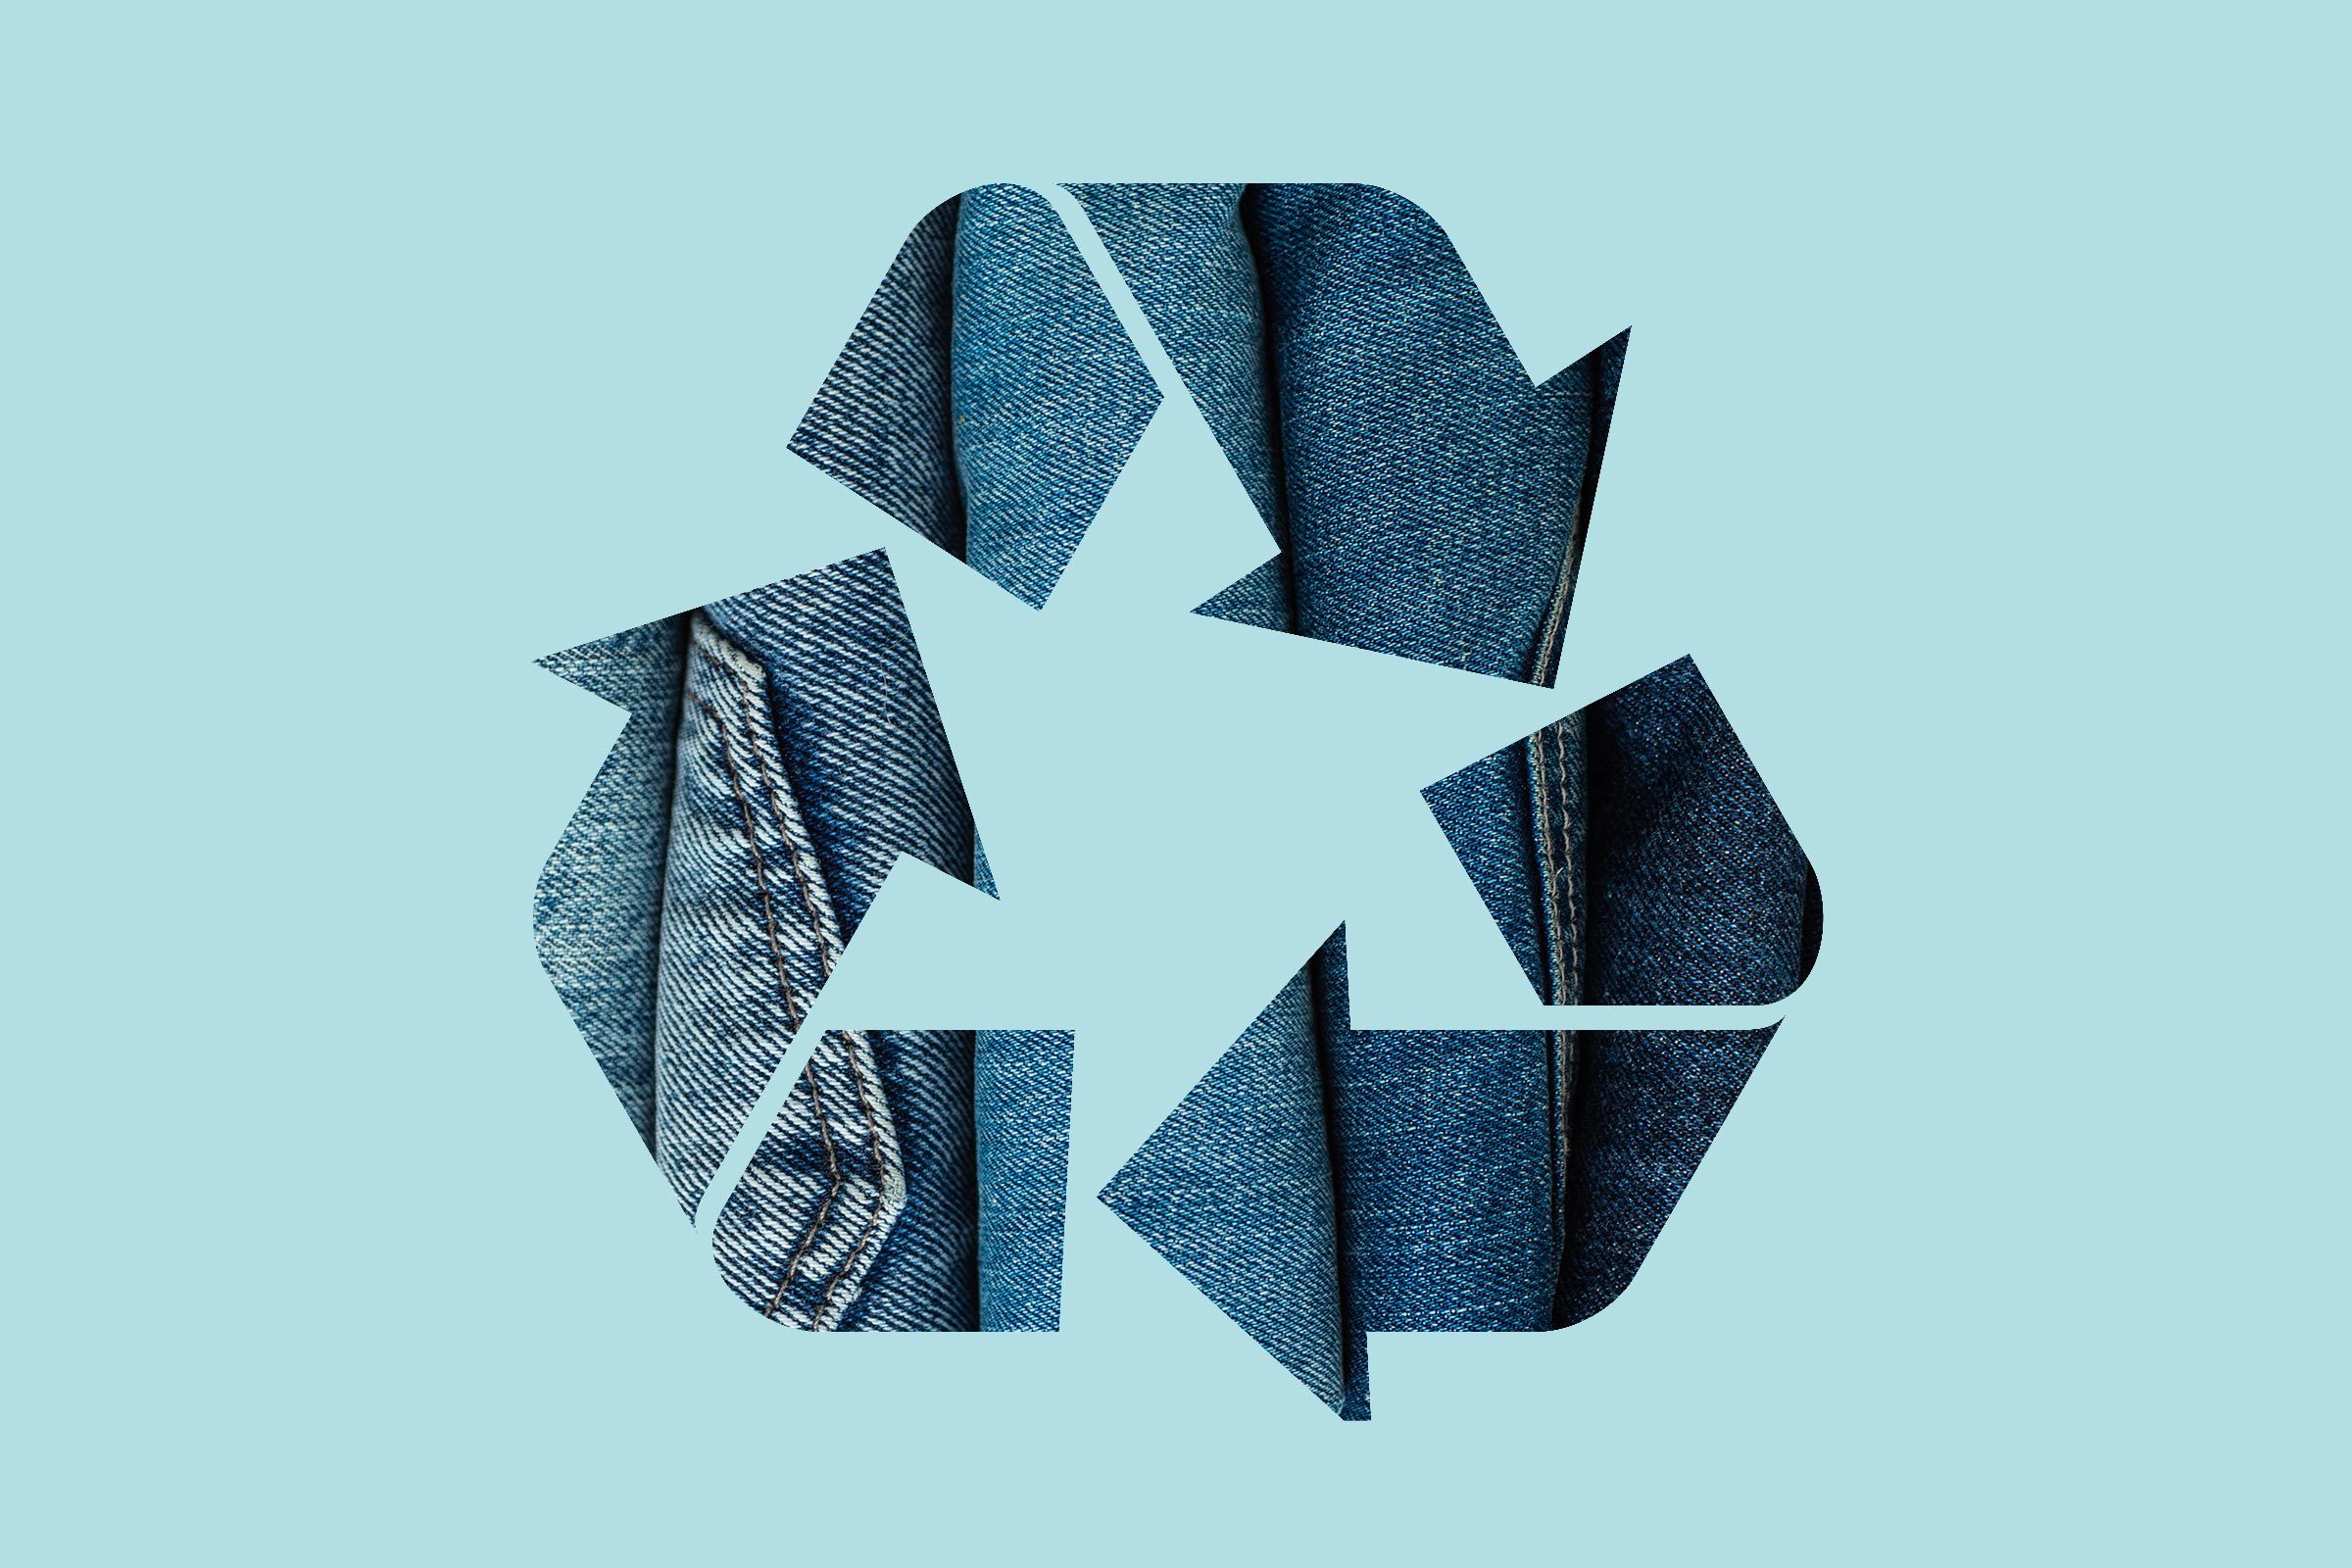 Recycle Your Denim - Blue Jeans Go Green Program